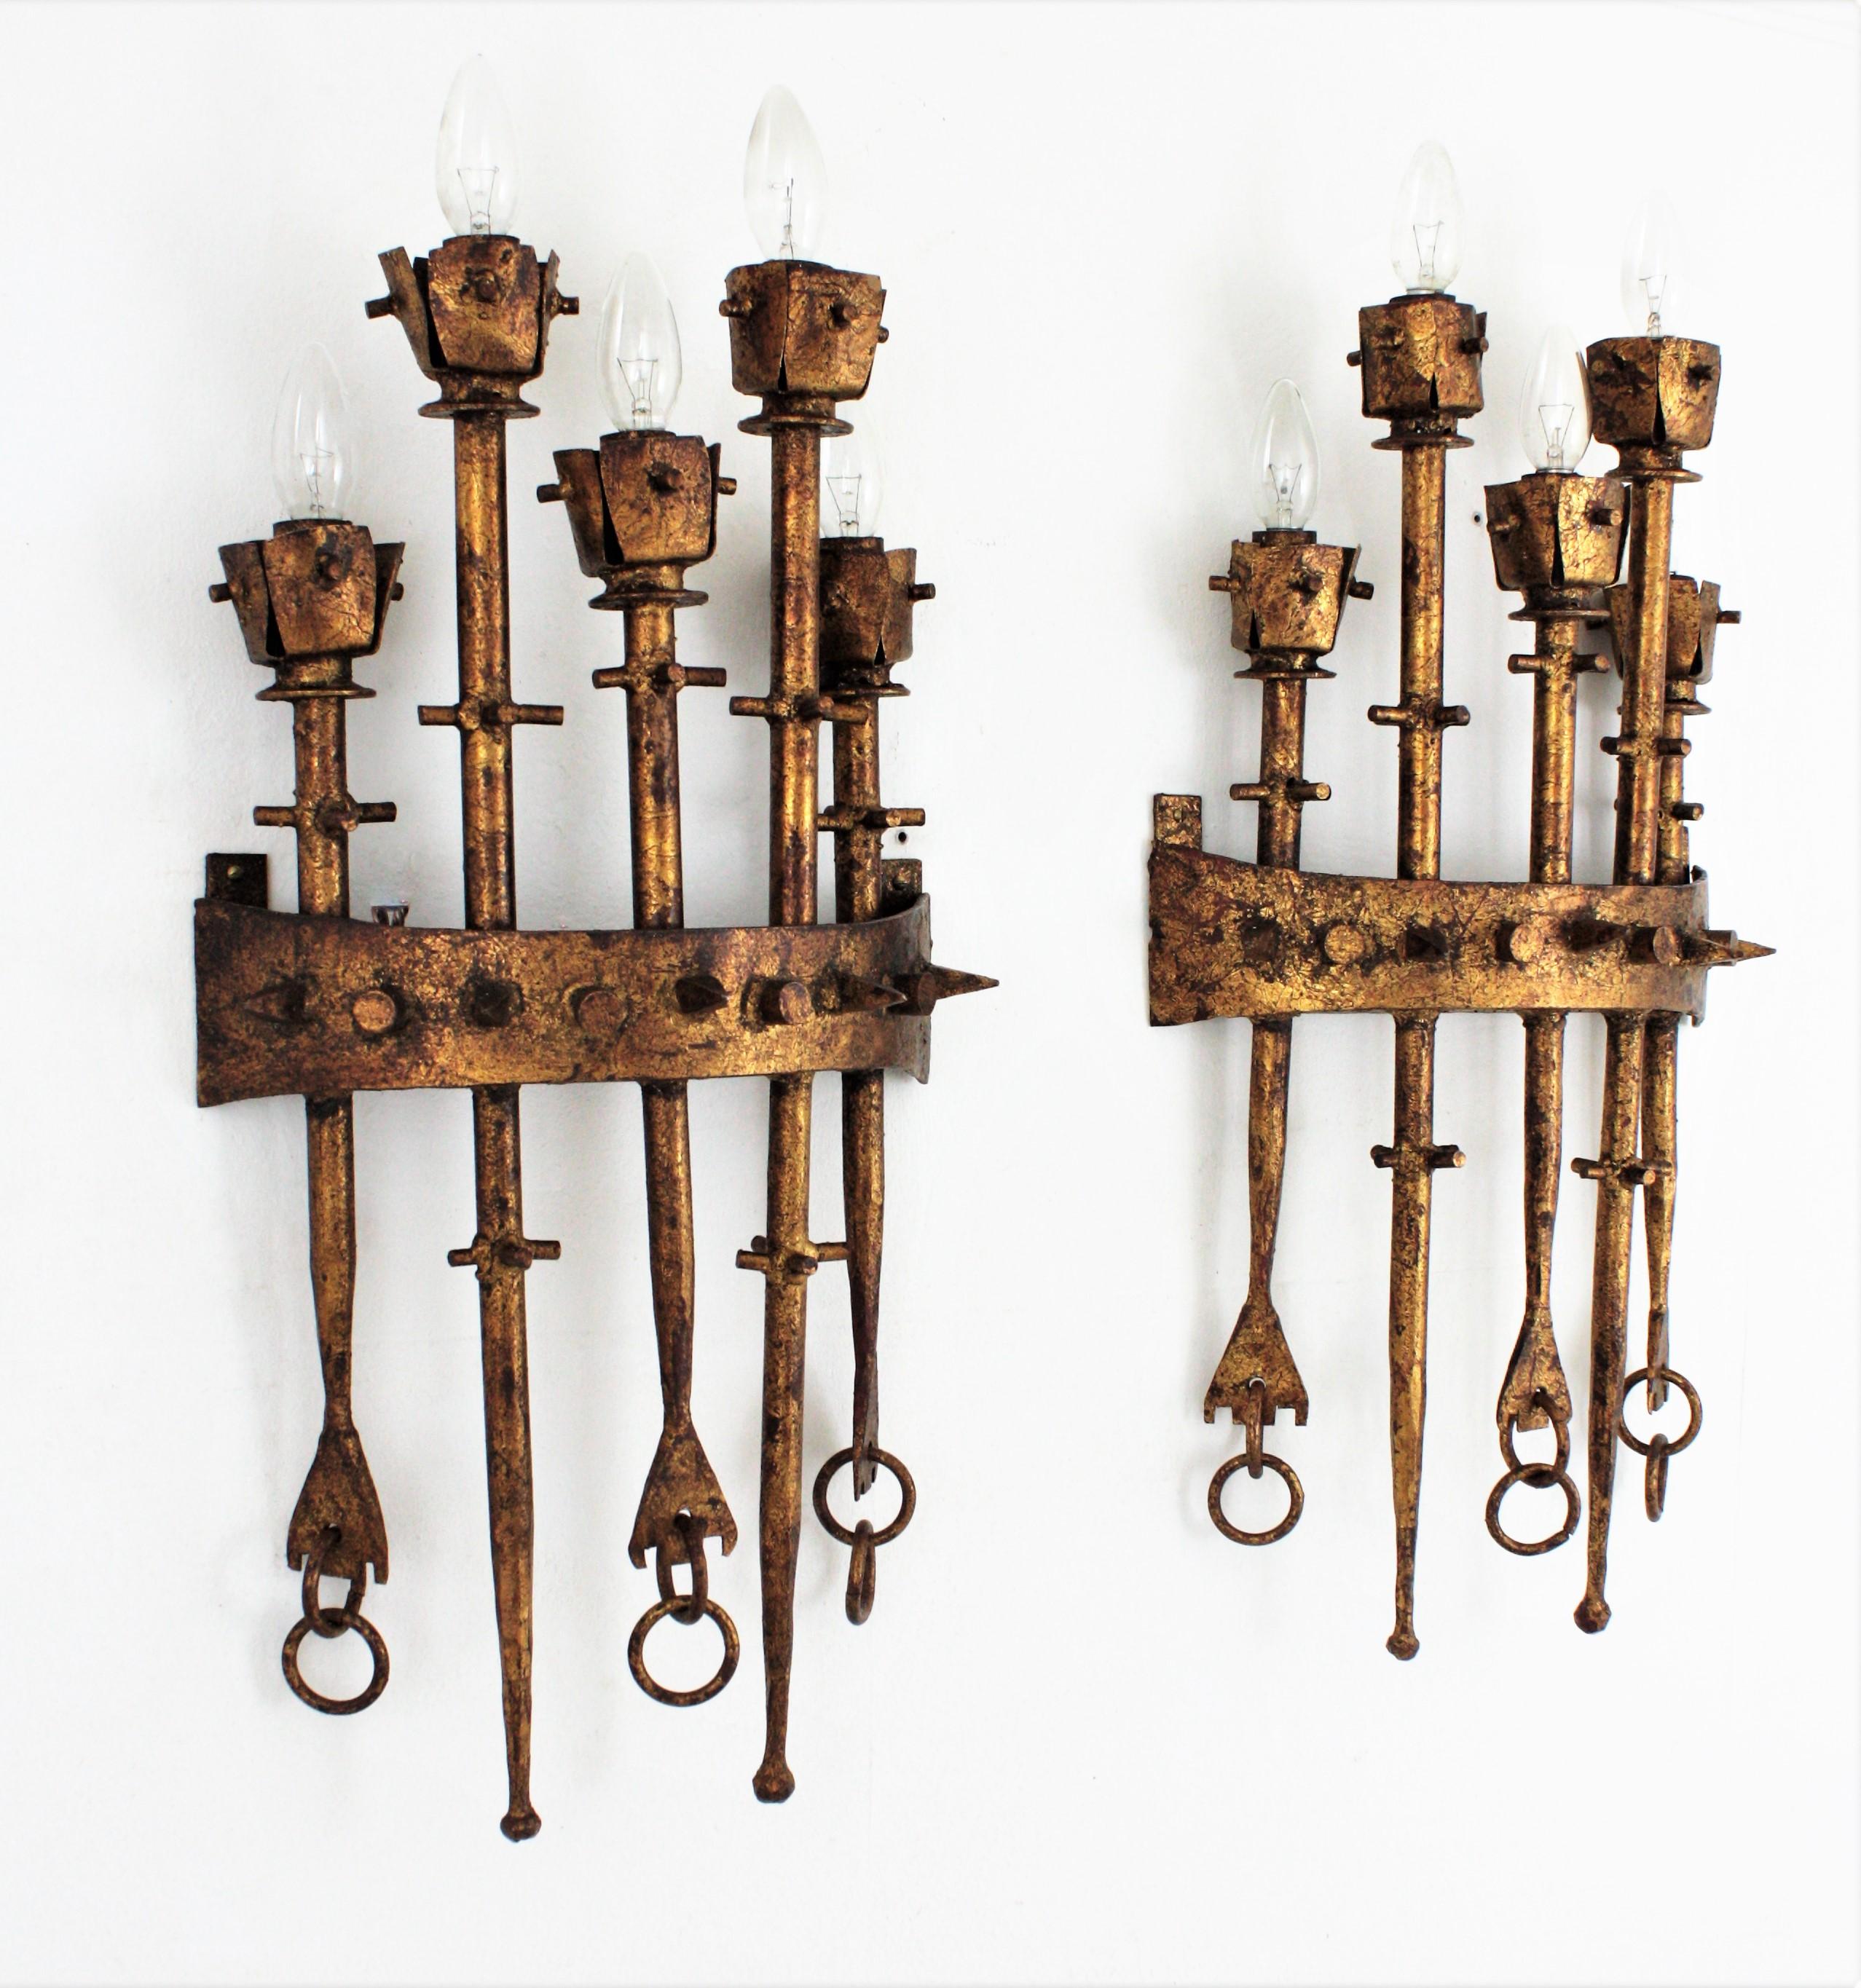 Outstanding pair of hand forged five-light gilt iron torchère wall lights. Spain, 1940s-1950s.
These wall sconces were handcrafted with an excellent metal work and Gothic / medieval inspired design. The five torch lights are featured in different